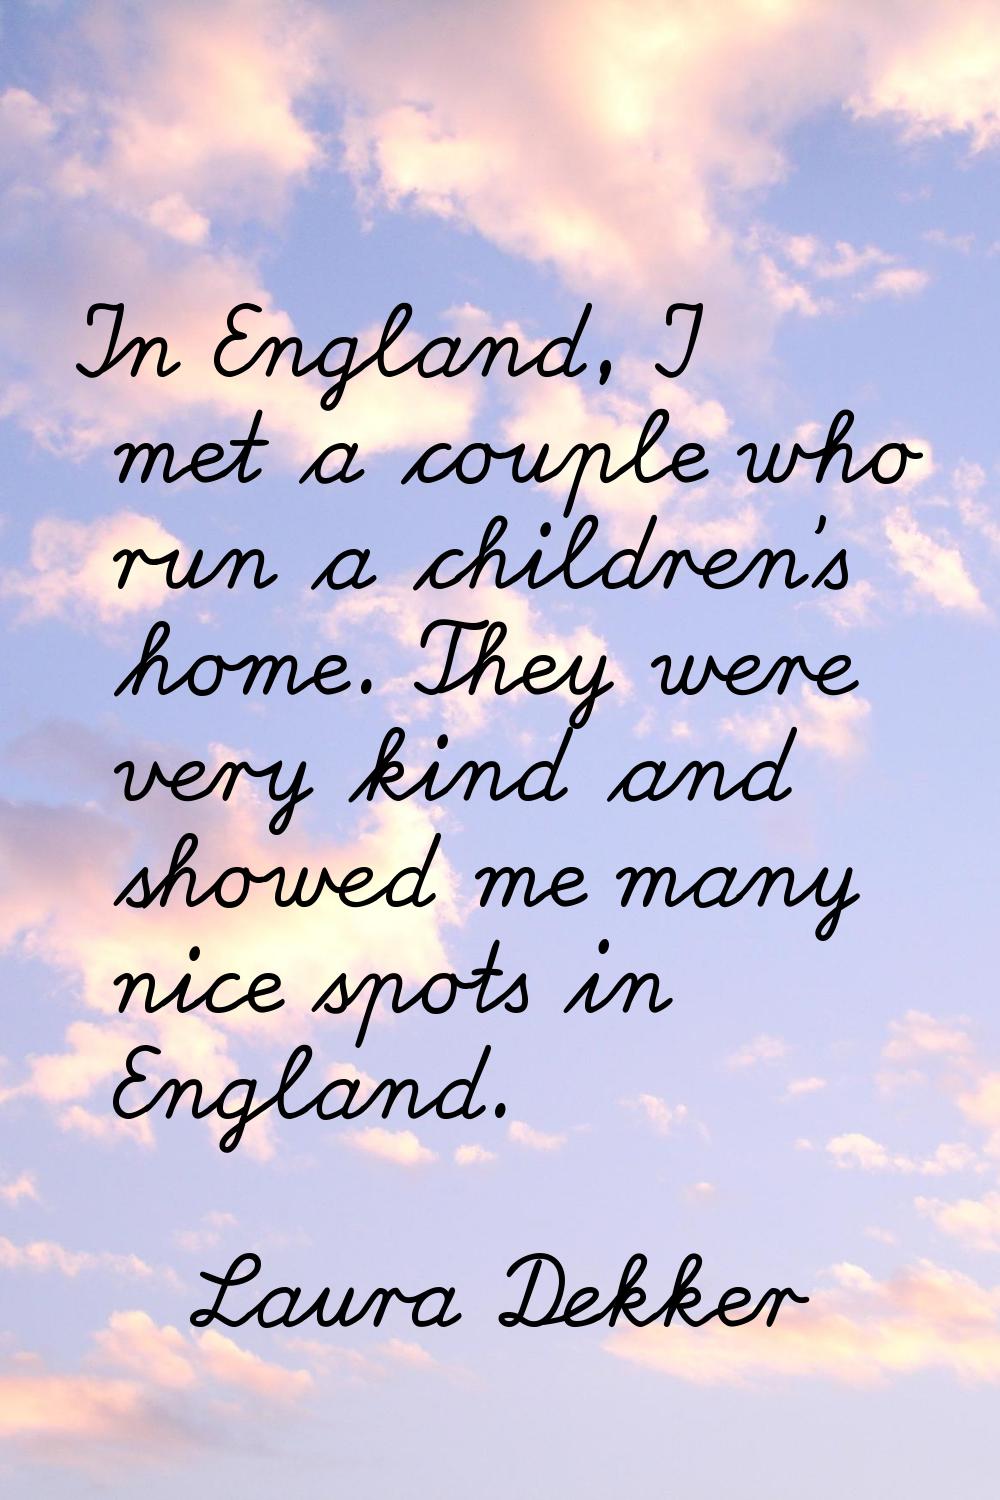 In England, I met a couple who run a children's home. They were very kind and showed me many nice s